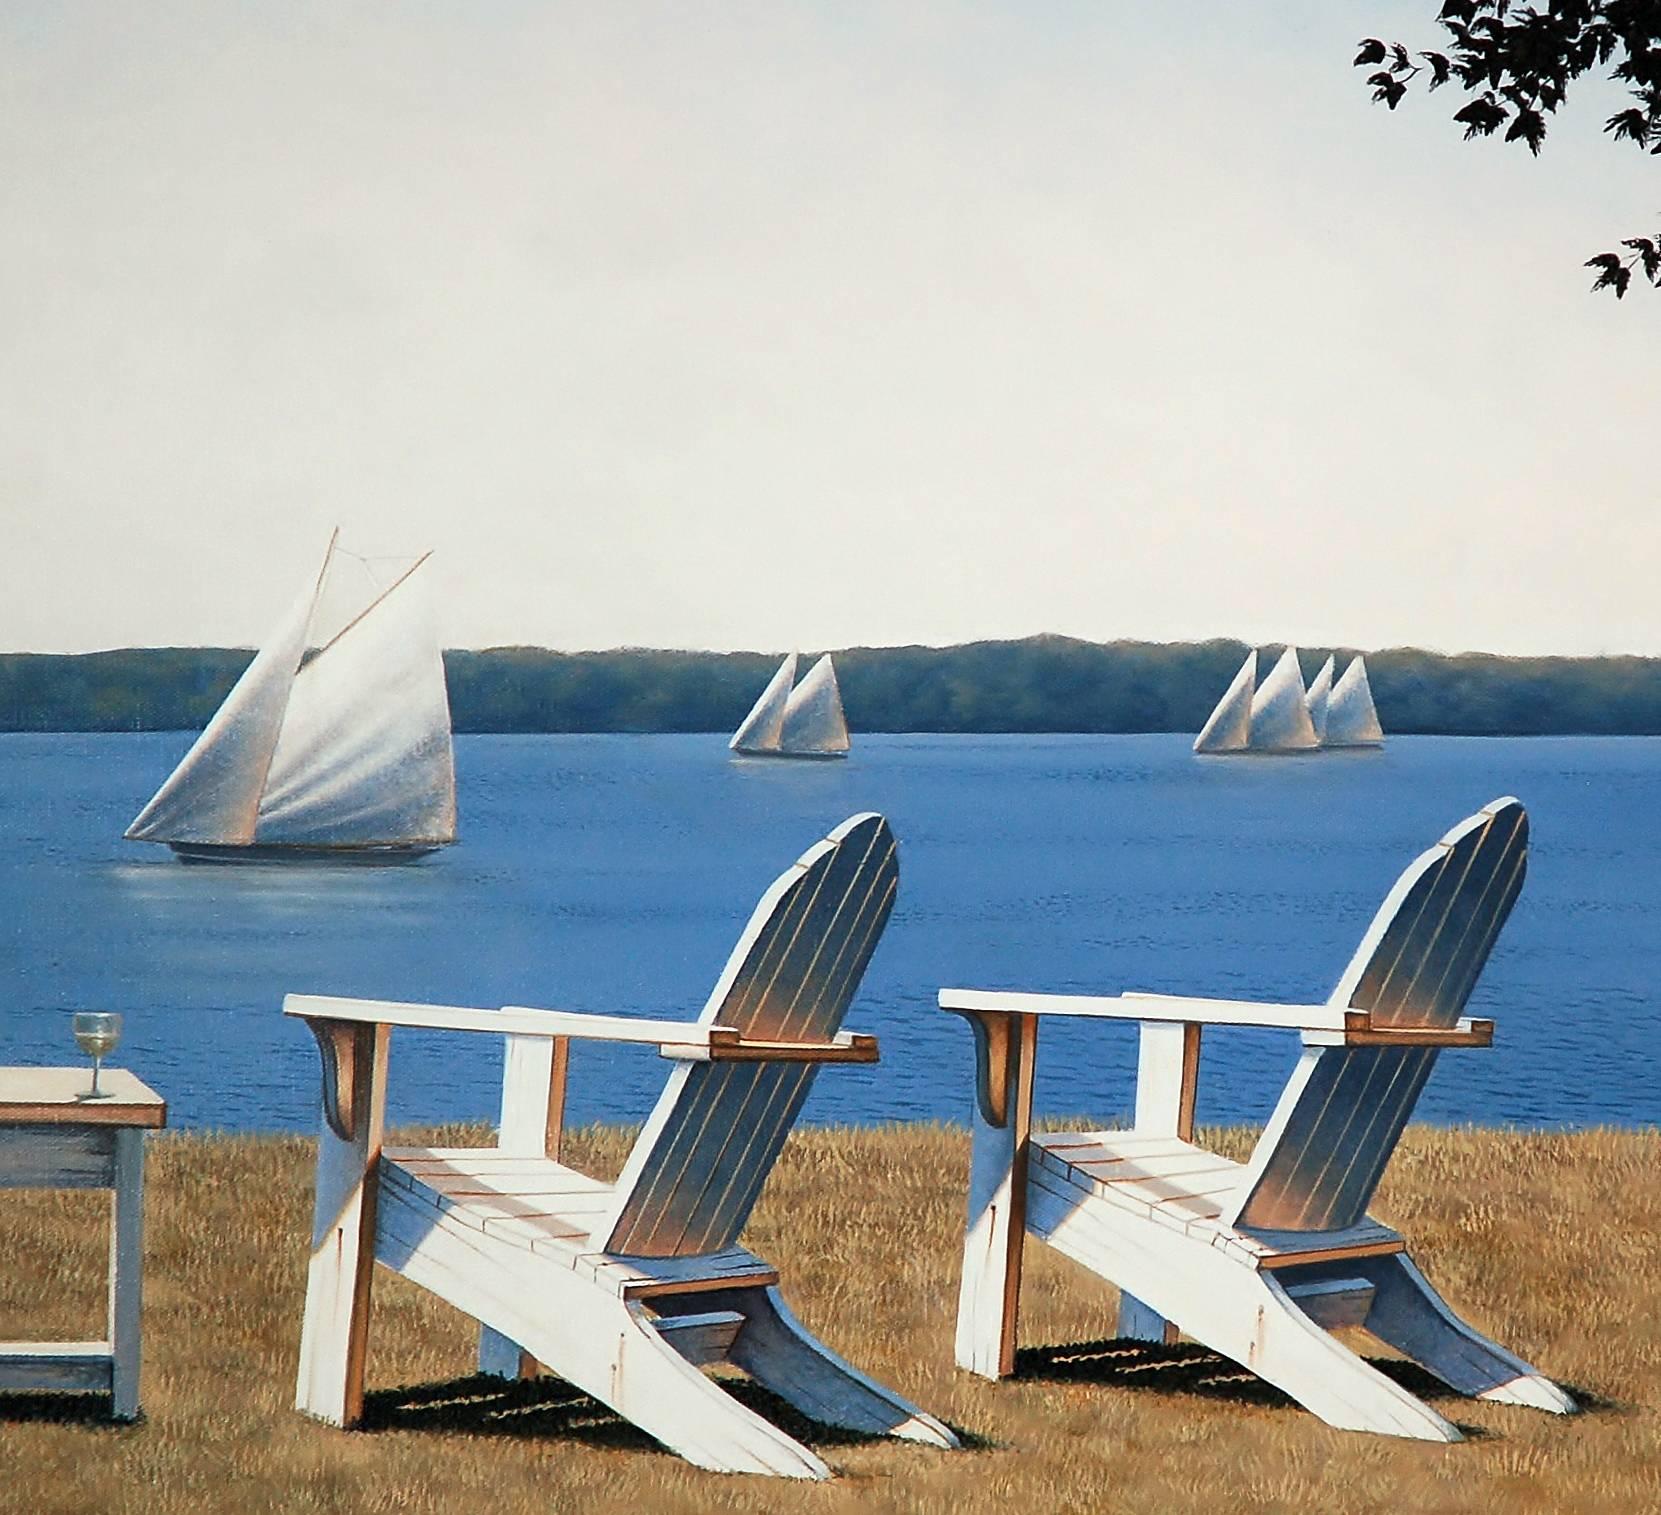 This traditional coastal oil painting by Daniel Pollera features three white Adirondack chairs, positioned in the grass overlooking a body of water. Several sailboats can be seen close up and further out along the horizon line. A pale blue sky fades